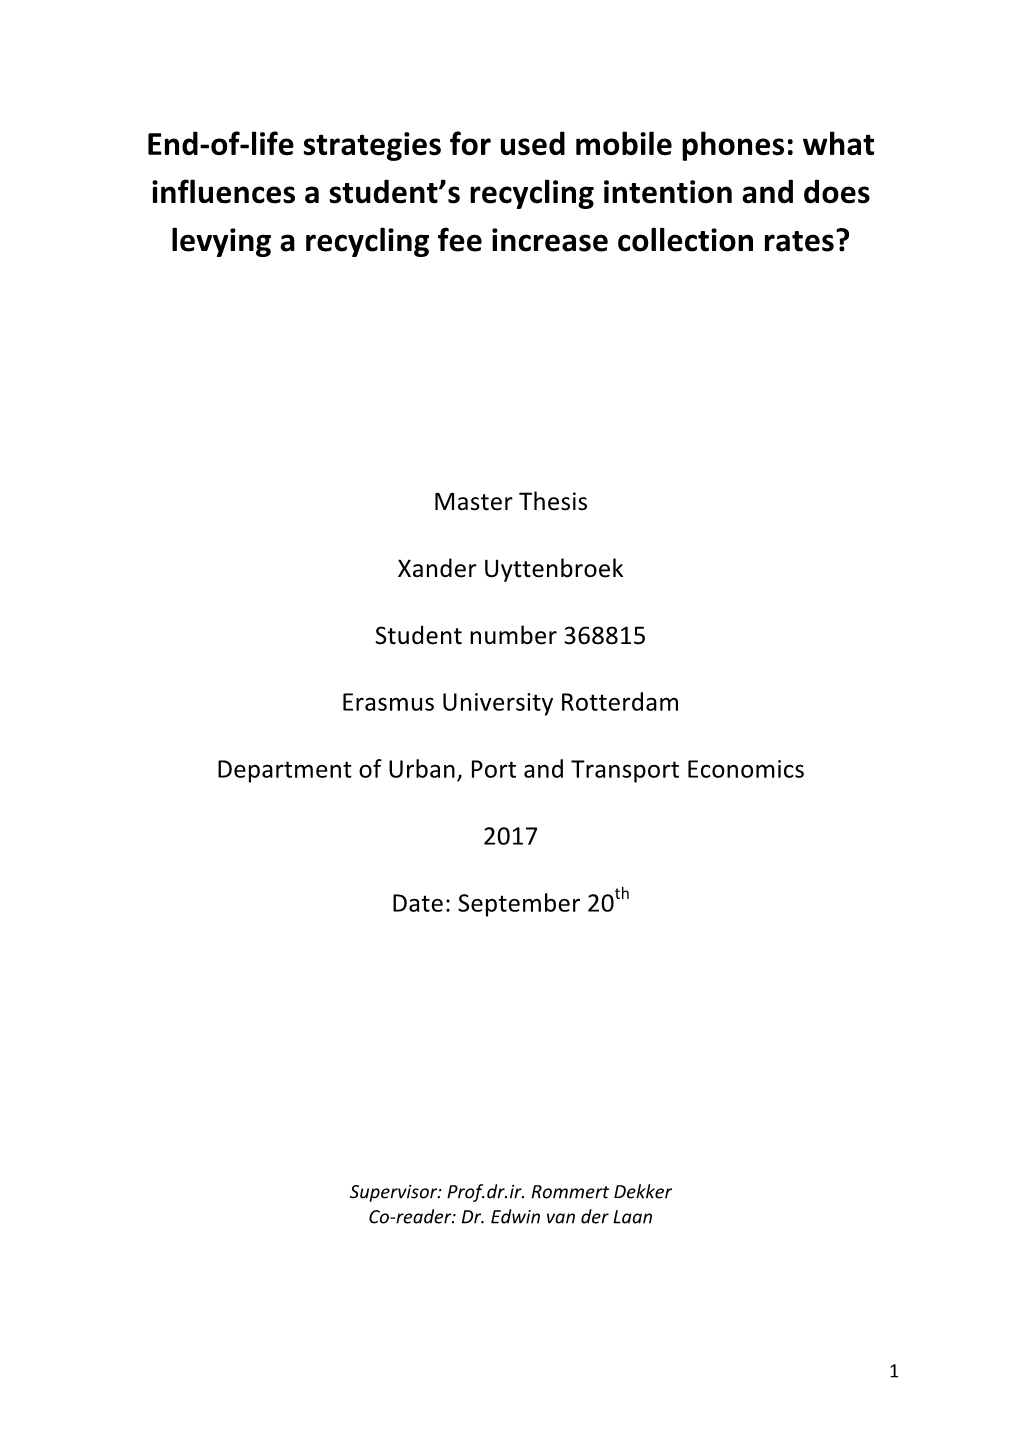 End-Of-Life Strategies for Used Mobile Phones: What Influences a Student’S Recycling Intention and Does Levying a Recycling Fee Increase Collection Rates?